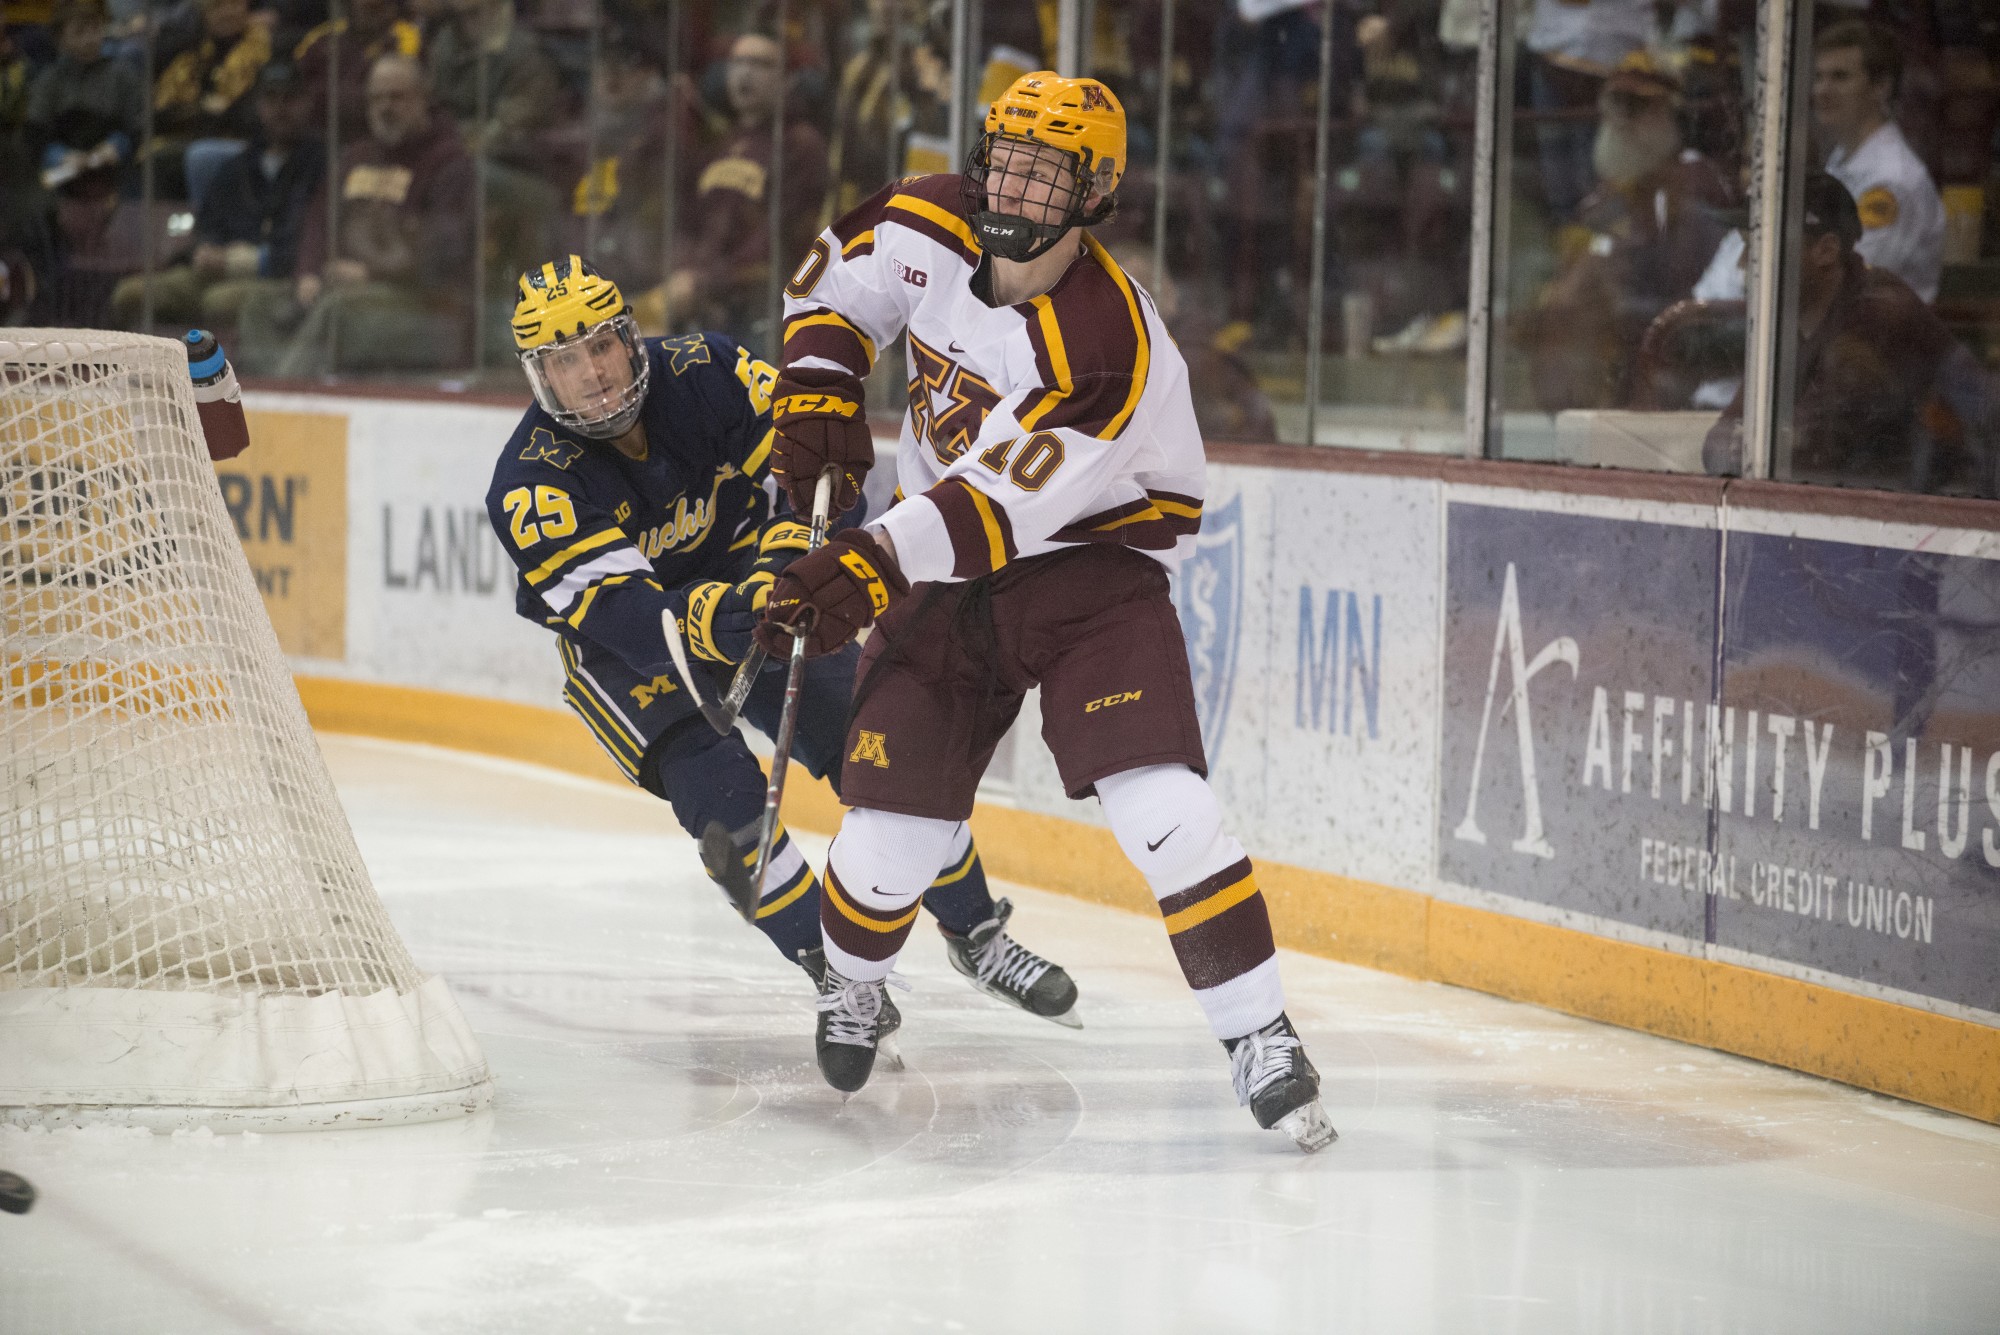 Gophers Defenseman Jackson Lacombe makes a pass at the 3M Arena at Mariucci on Friday, Feb. 28. The Gophers lost to Michigan 3-2.